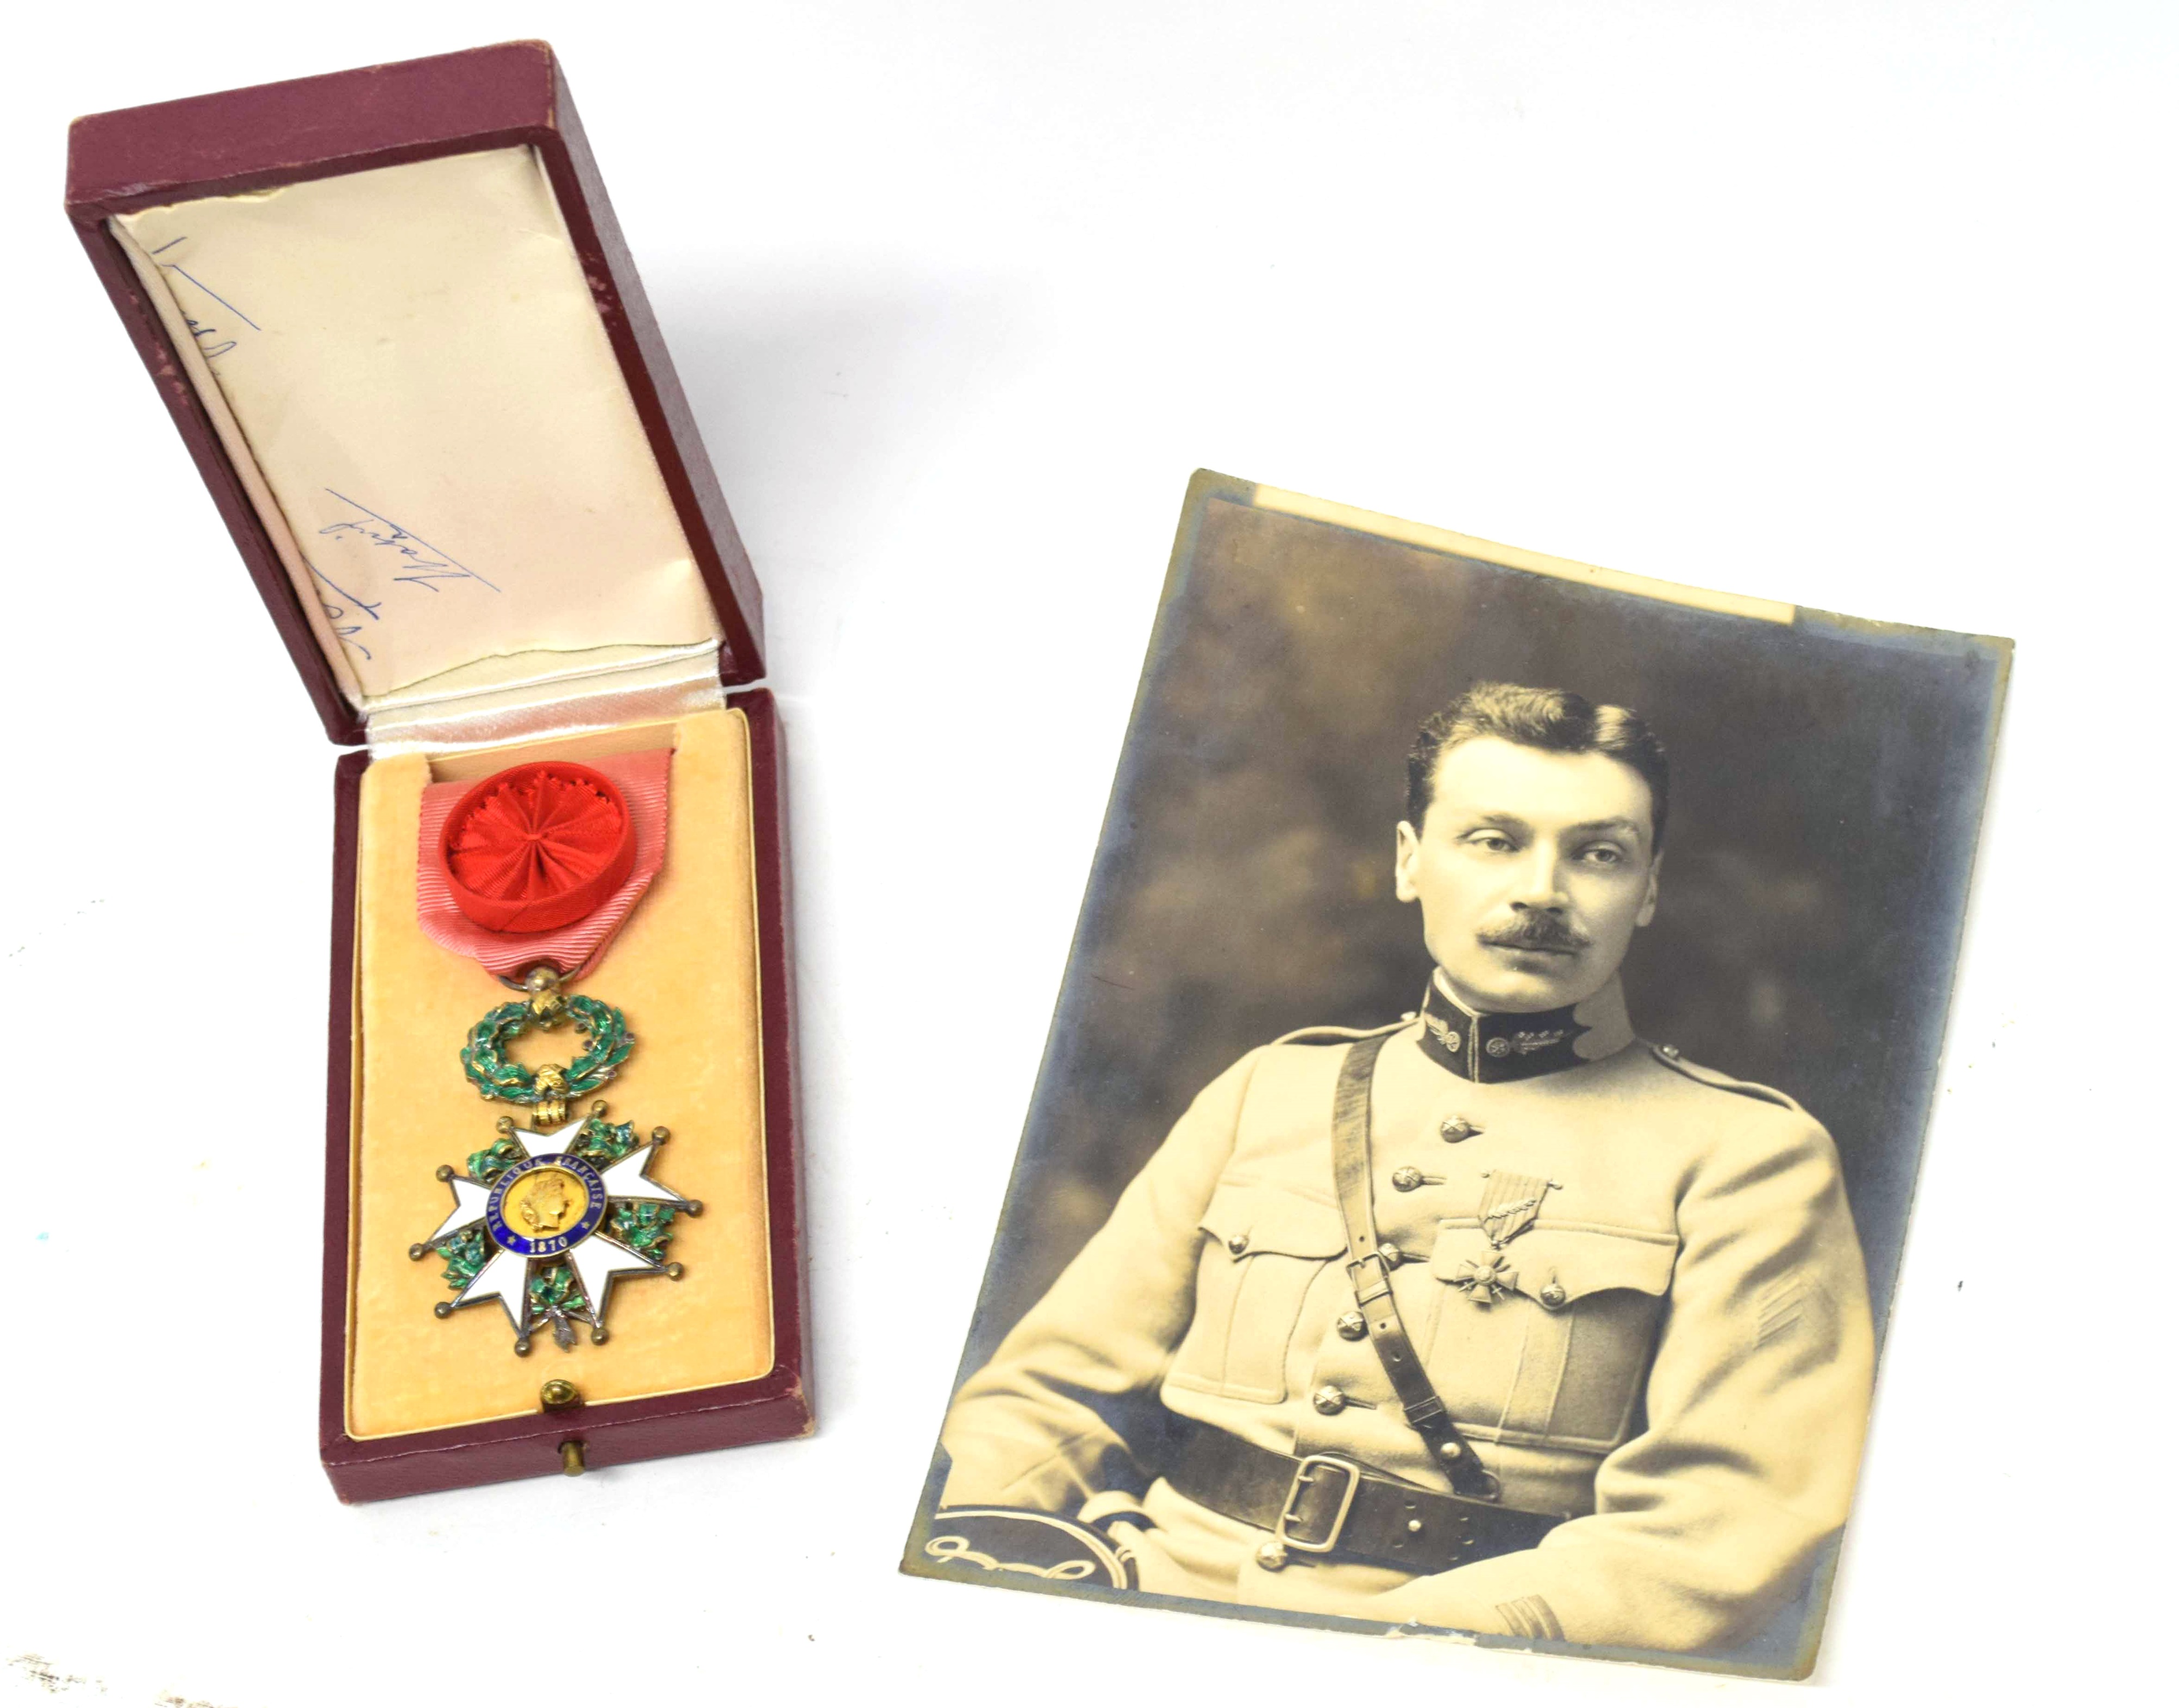 Military Memories Live On In Artefacts